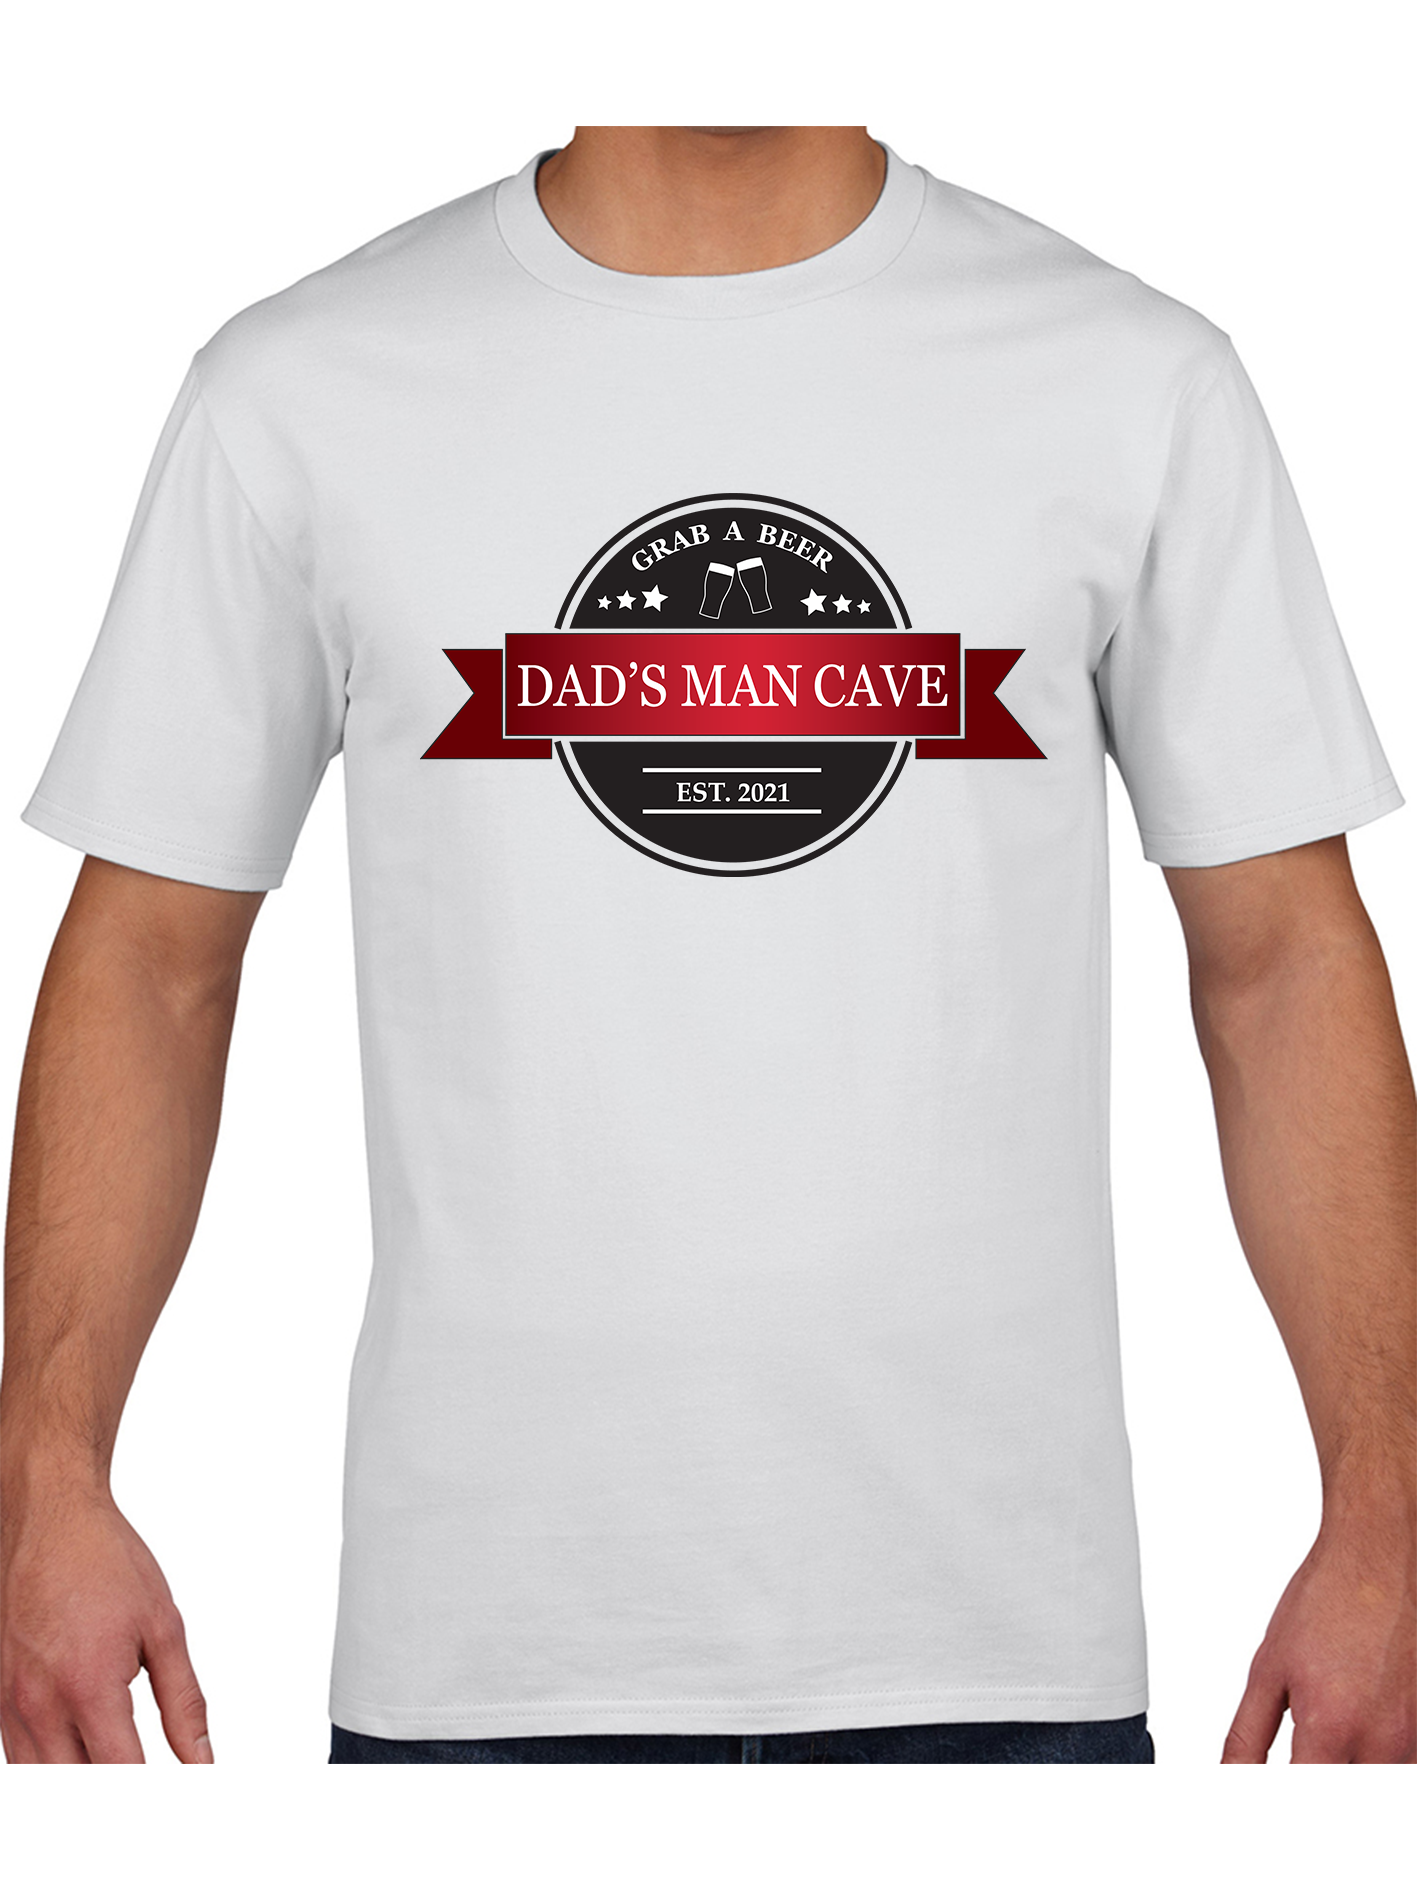 Man Cave Dad T-shirt | Father's Day T-shirt | White